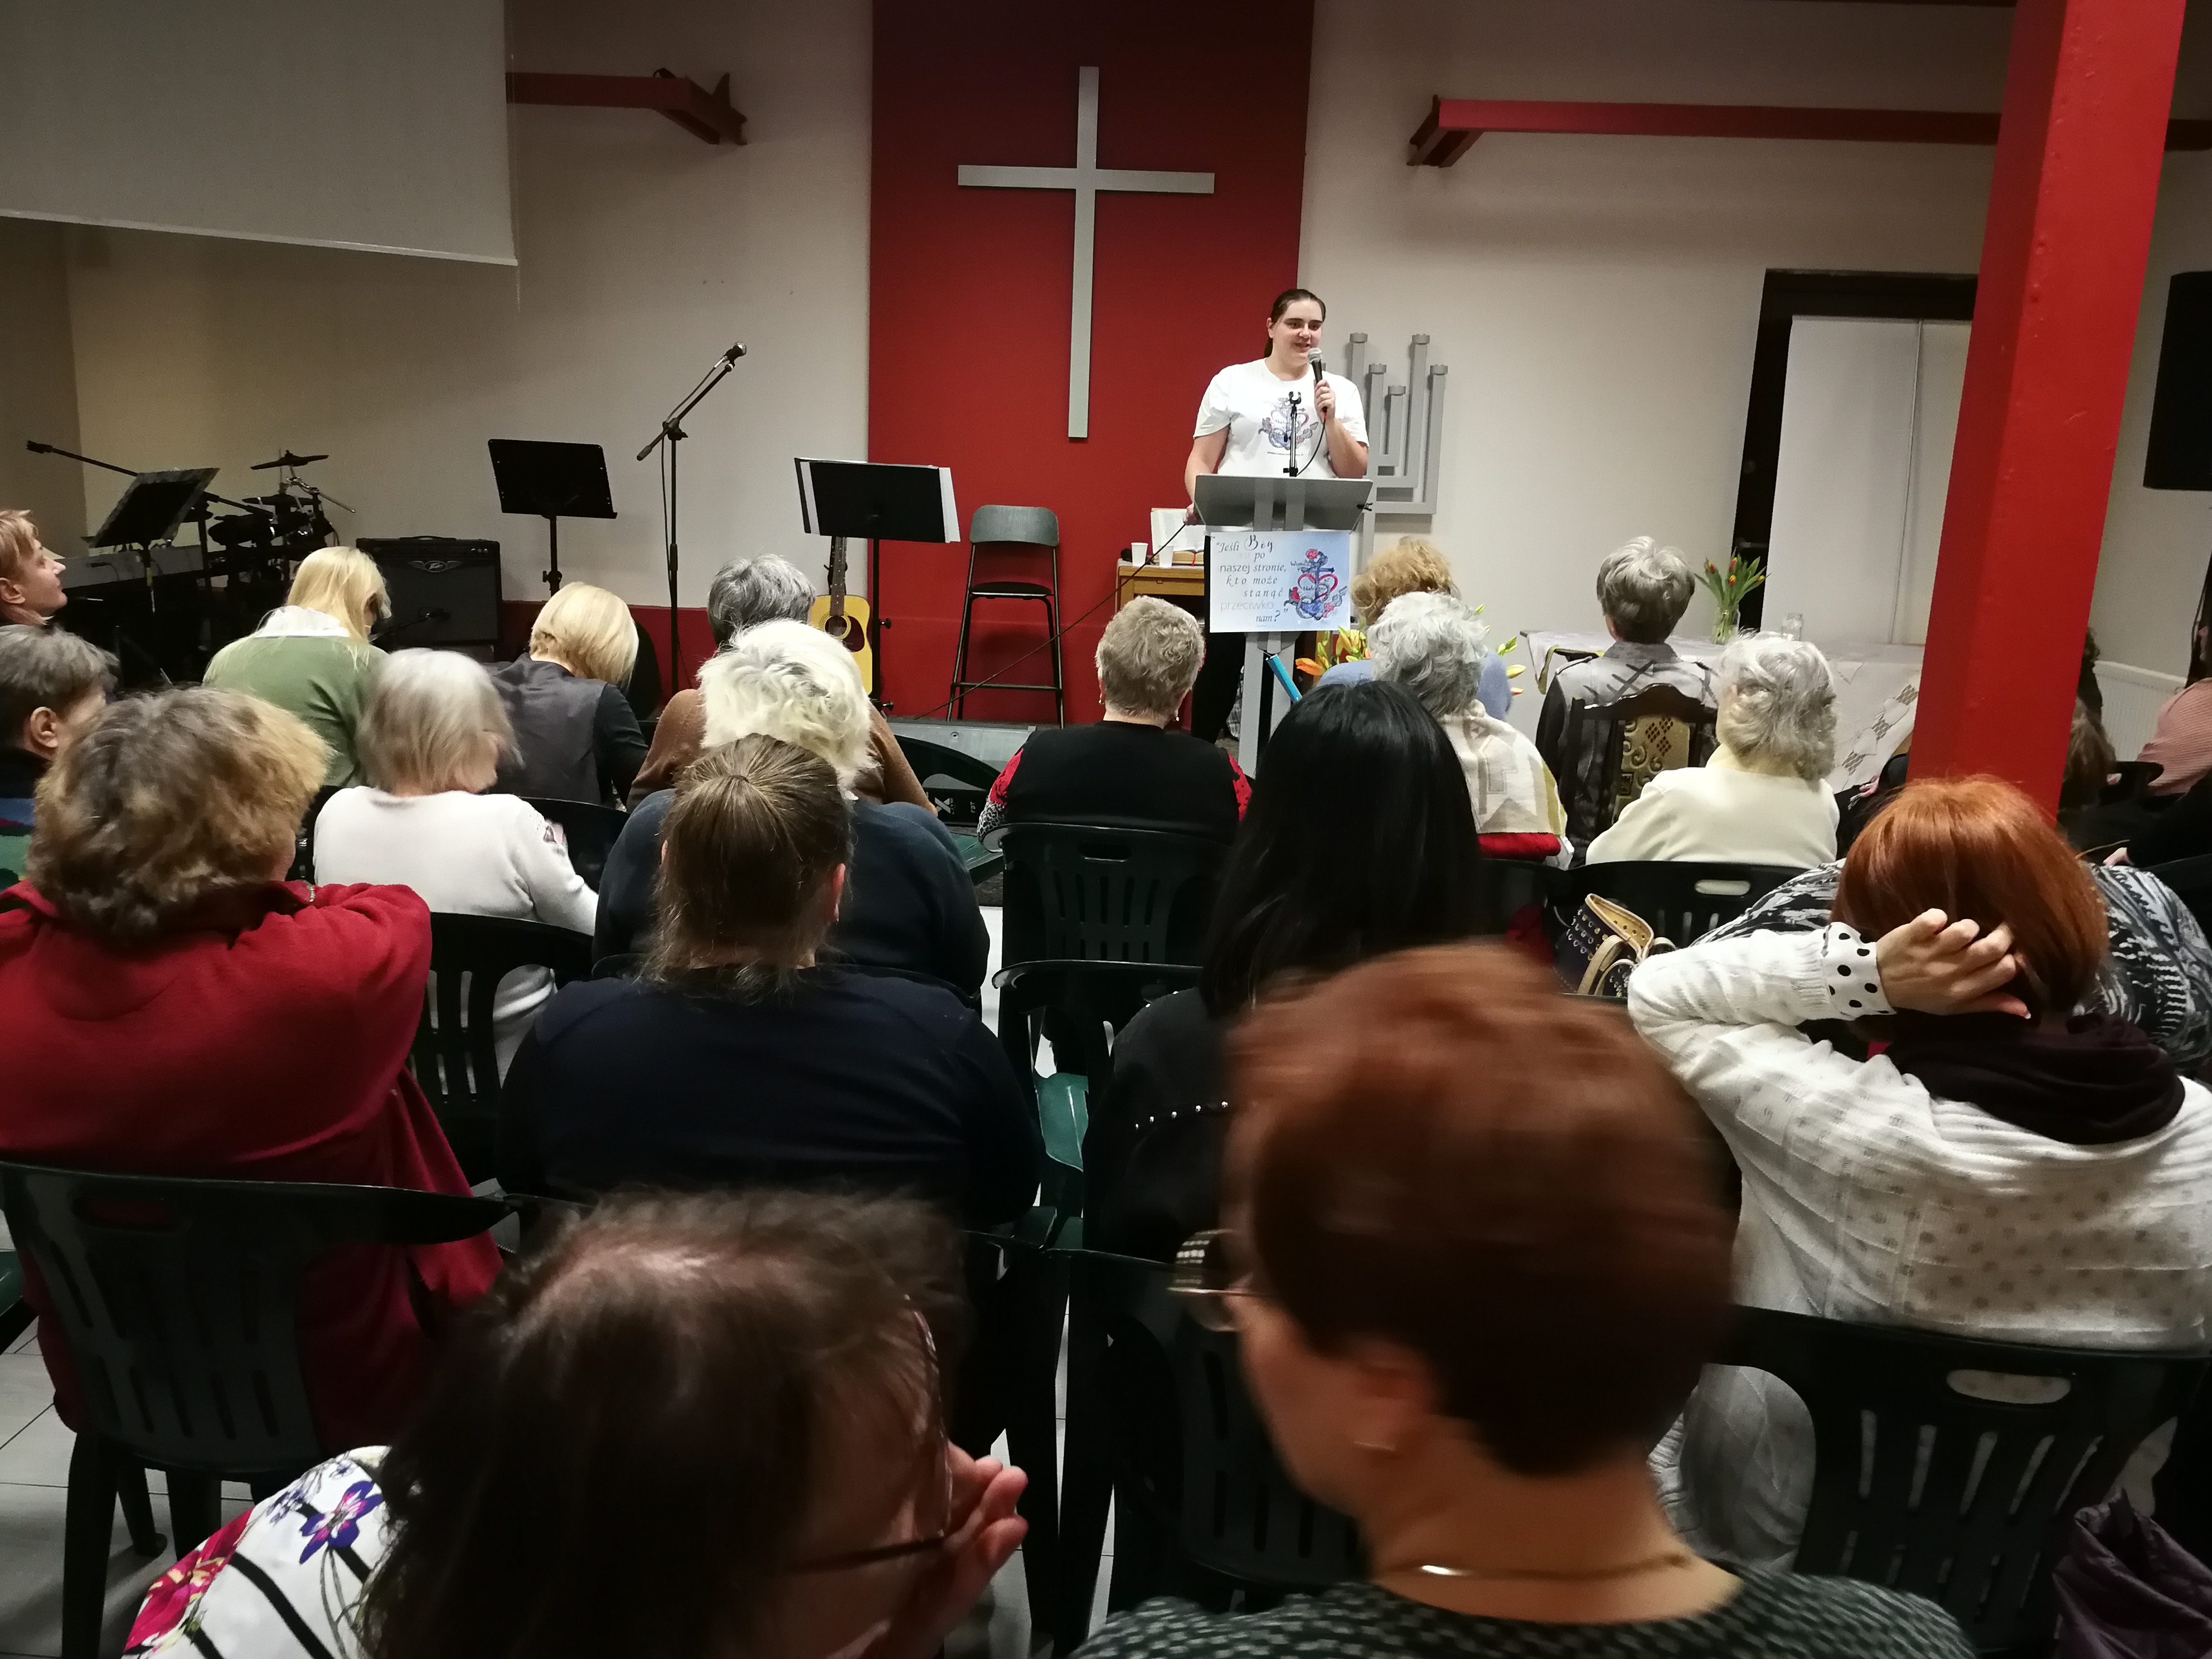 STEPS OF FAITH – REPORT FROM WOMEN’S CONFERENCE III